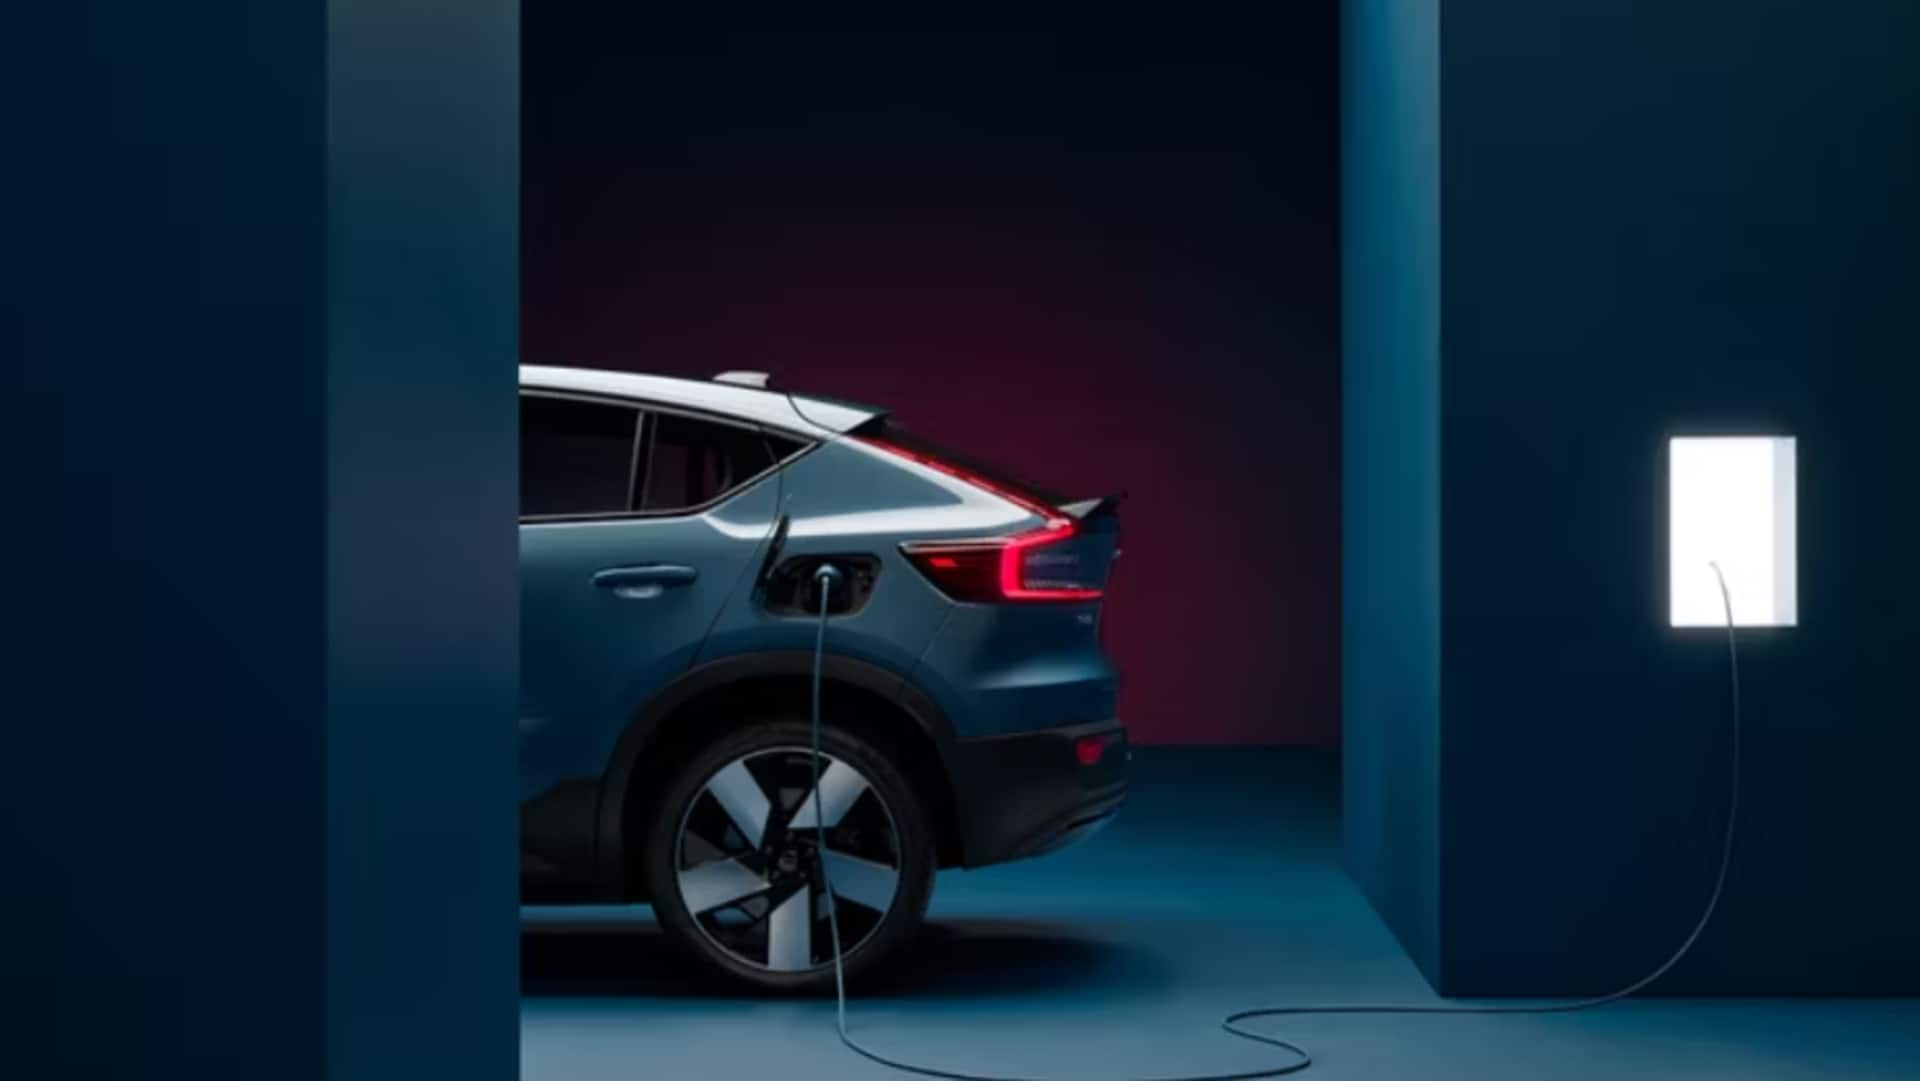 Why do EV makers reveal only 10-80% battery charging time